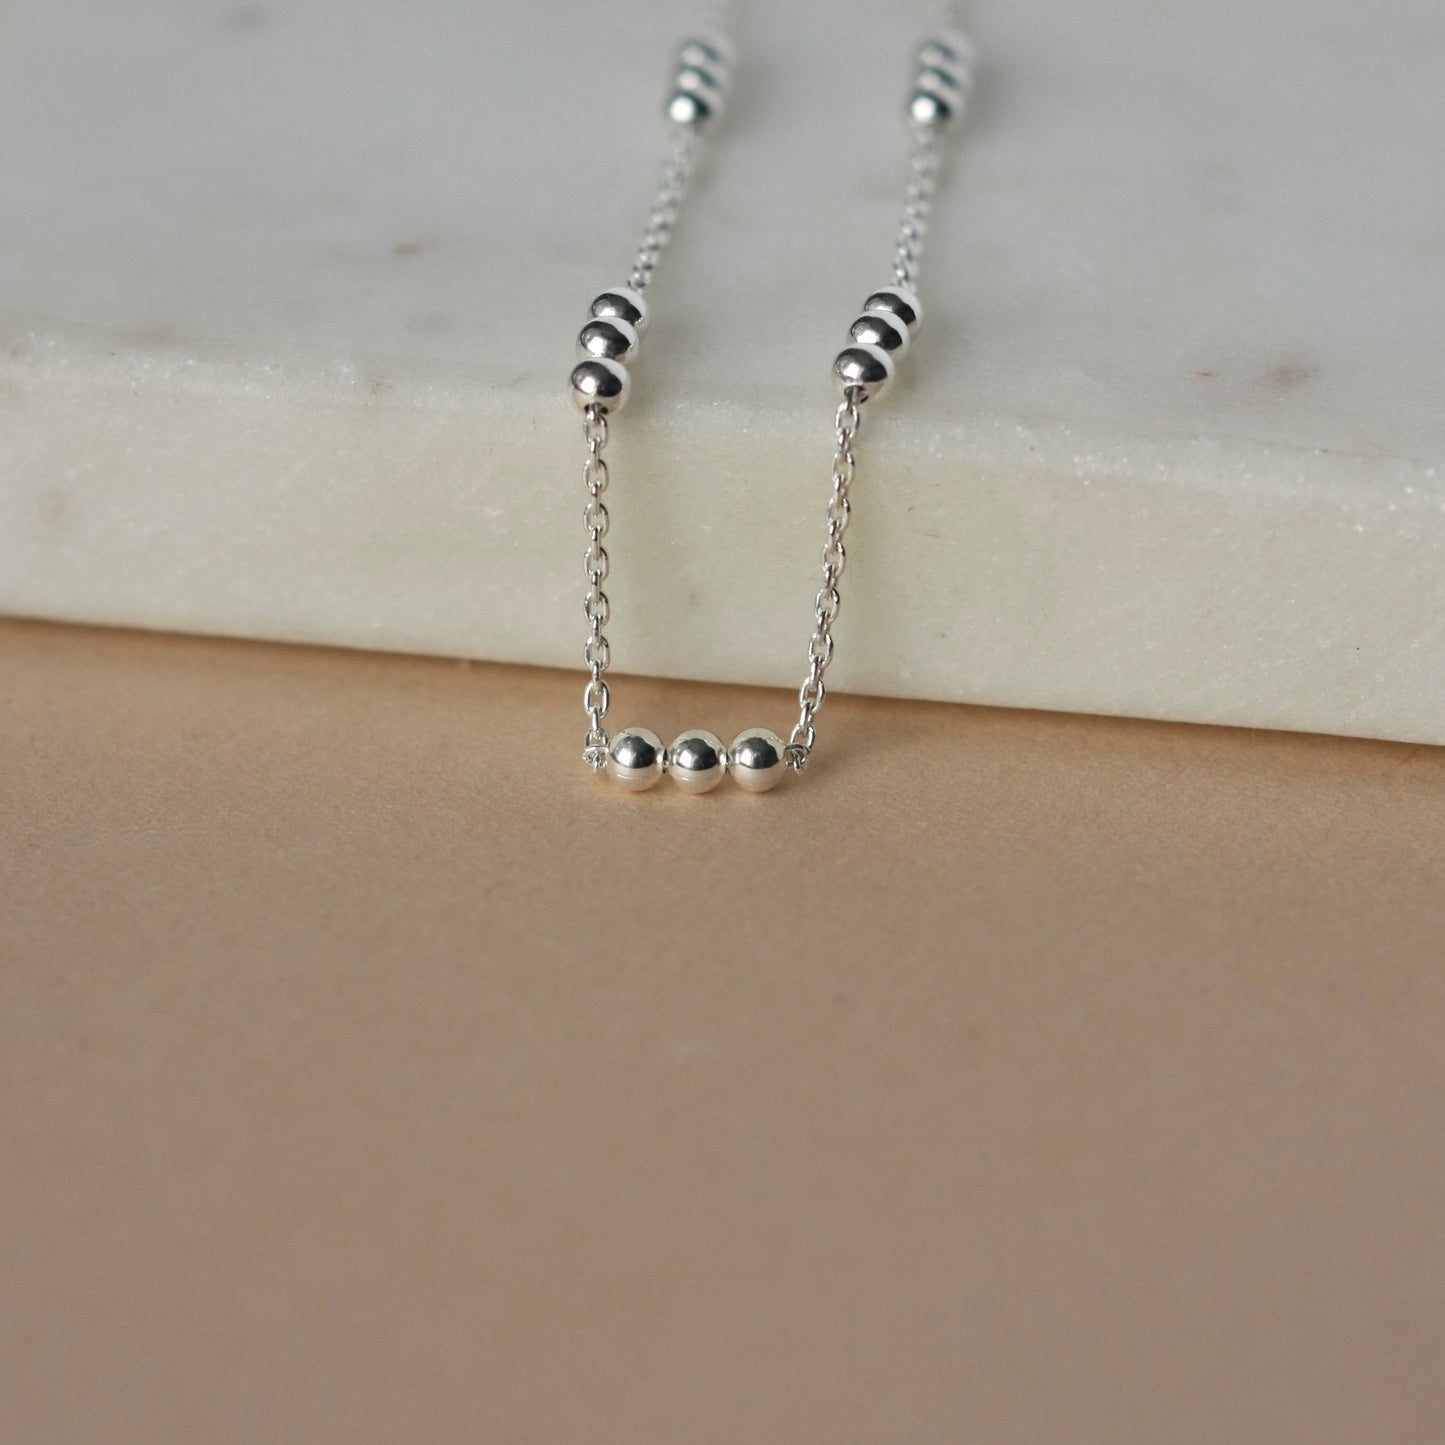 Silver Beaded Chain Necklace